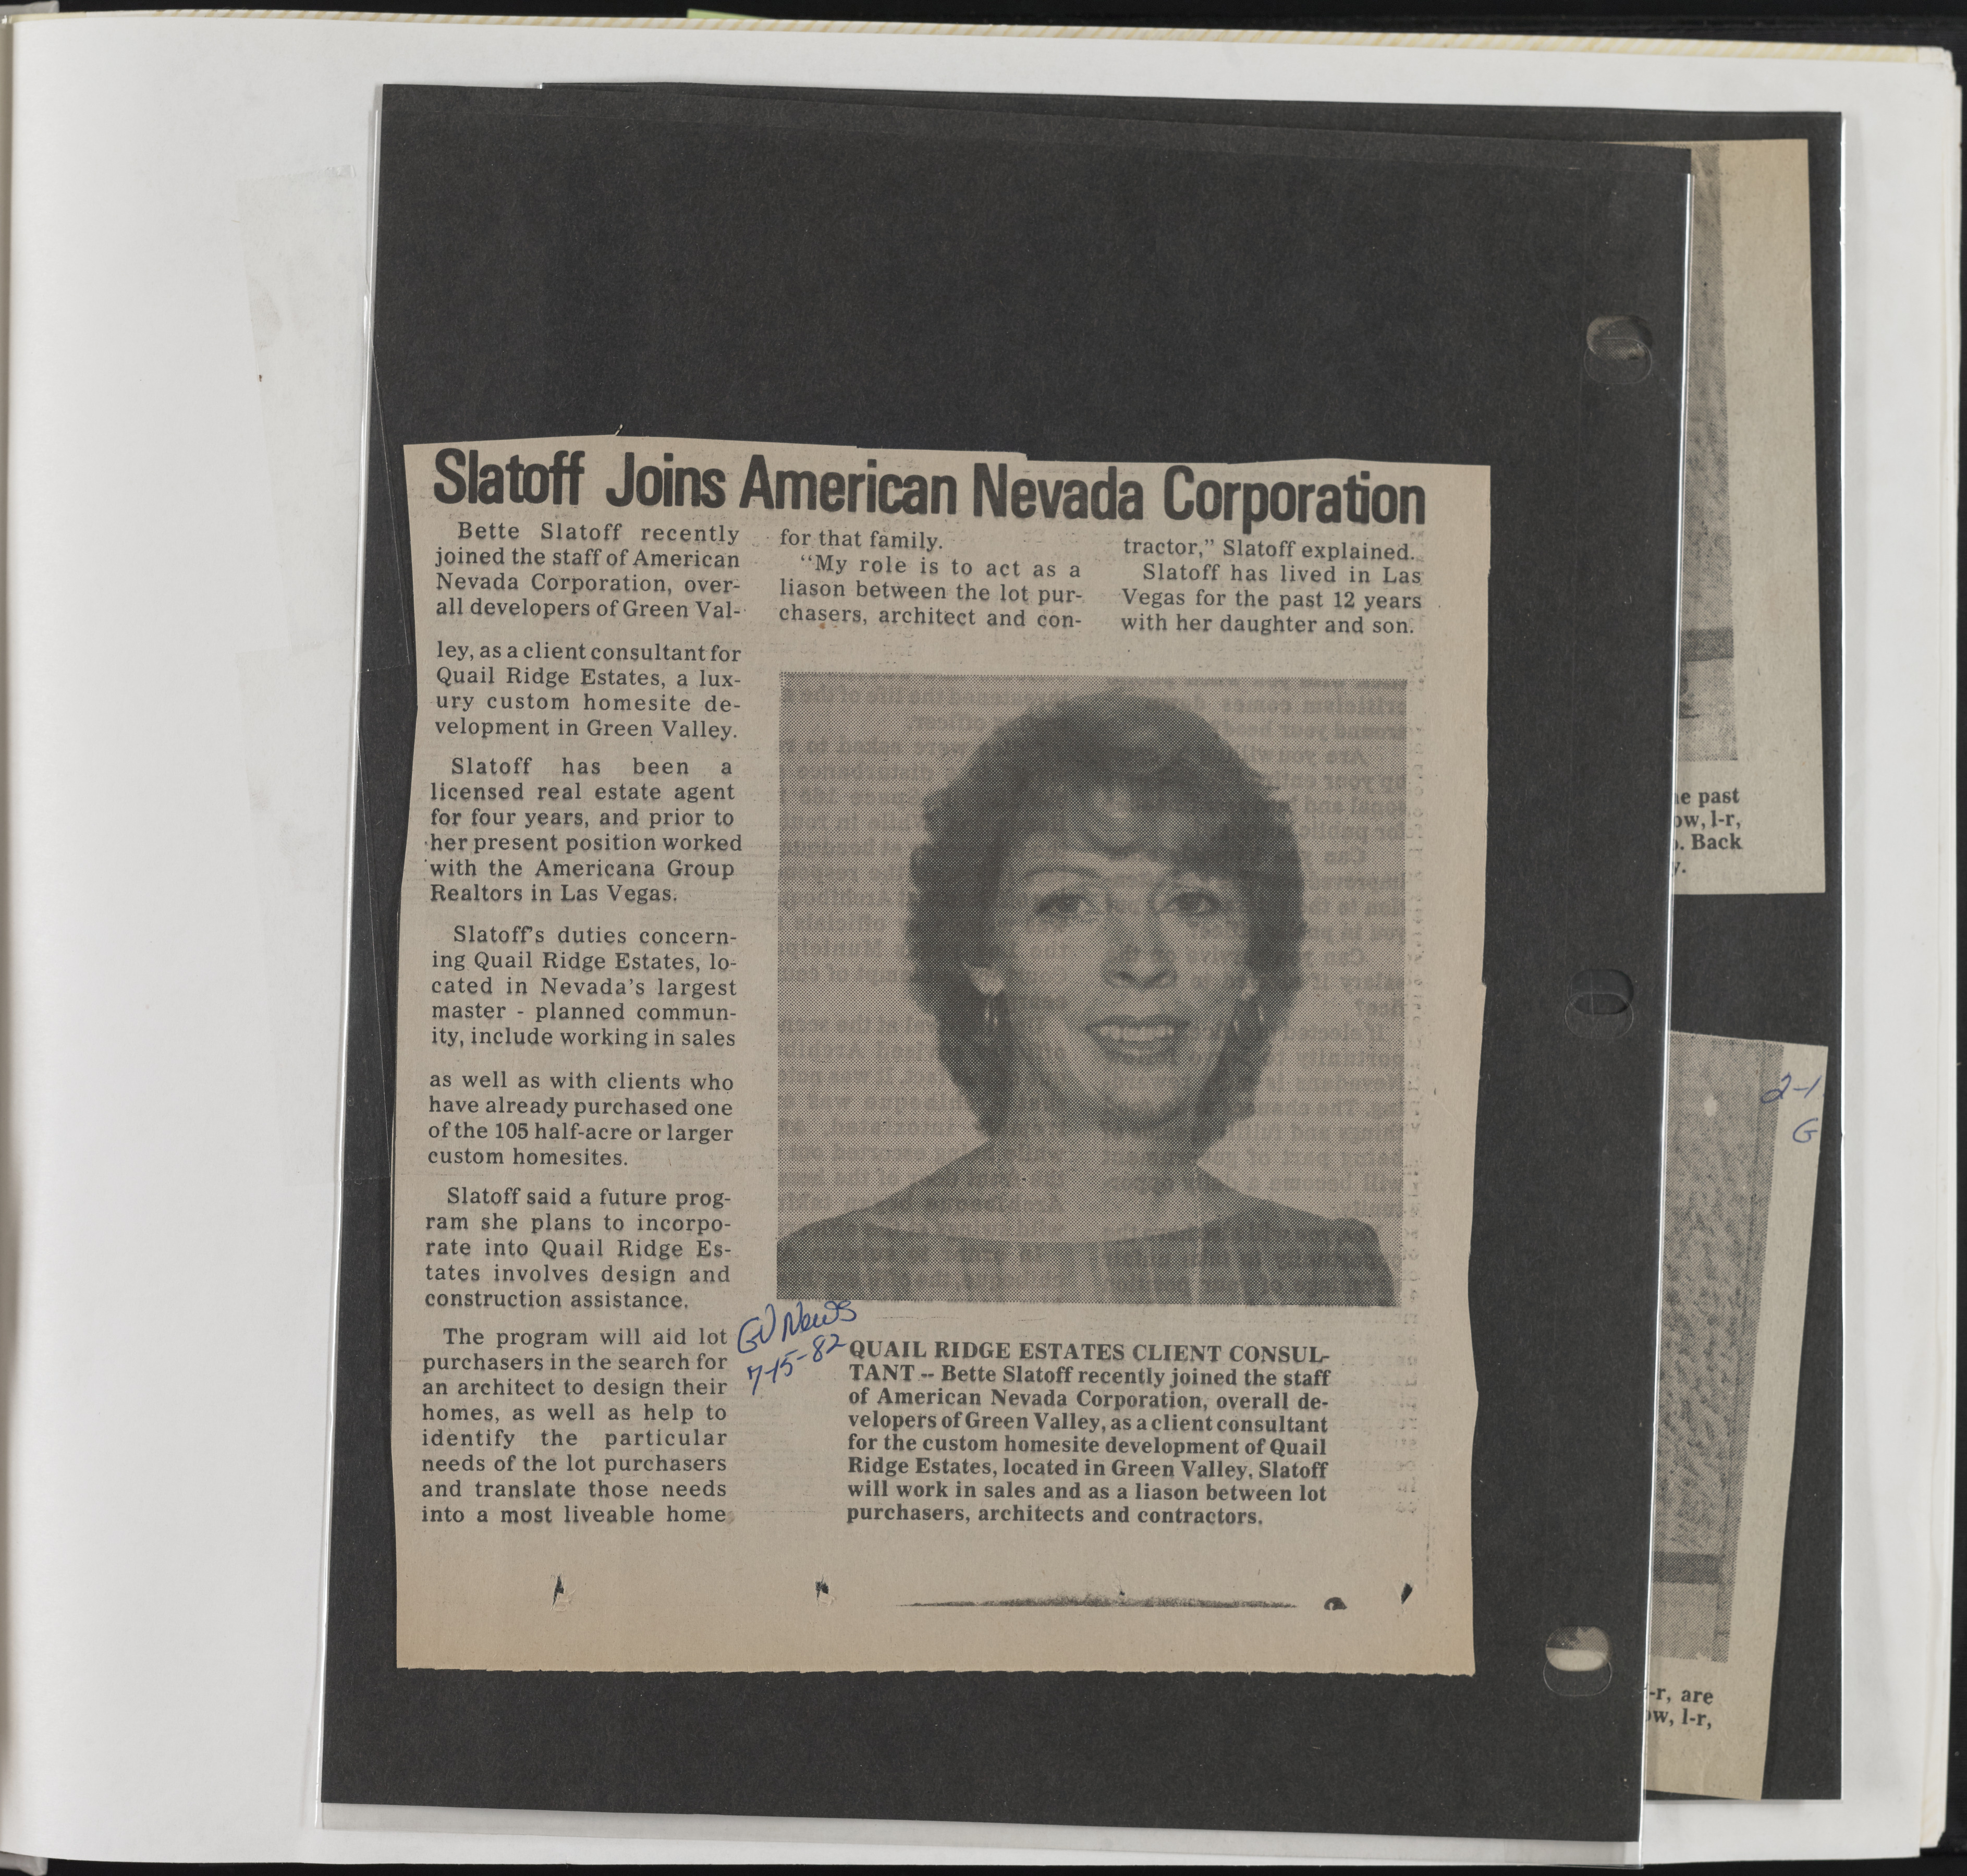 Newspaper clipping, Slatoff joins American Nevada Corporation, Green Valley News, July 15, 1982